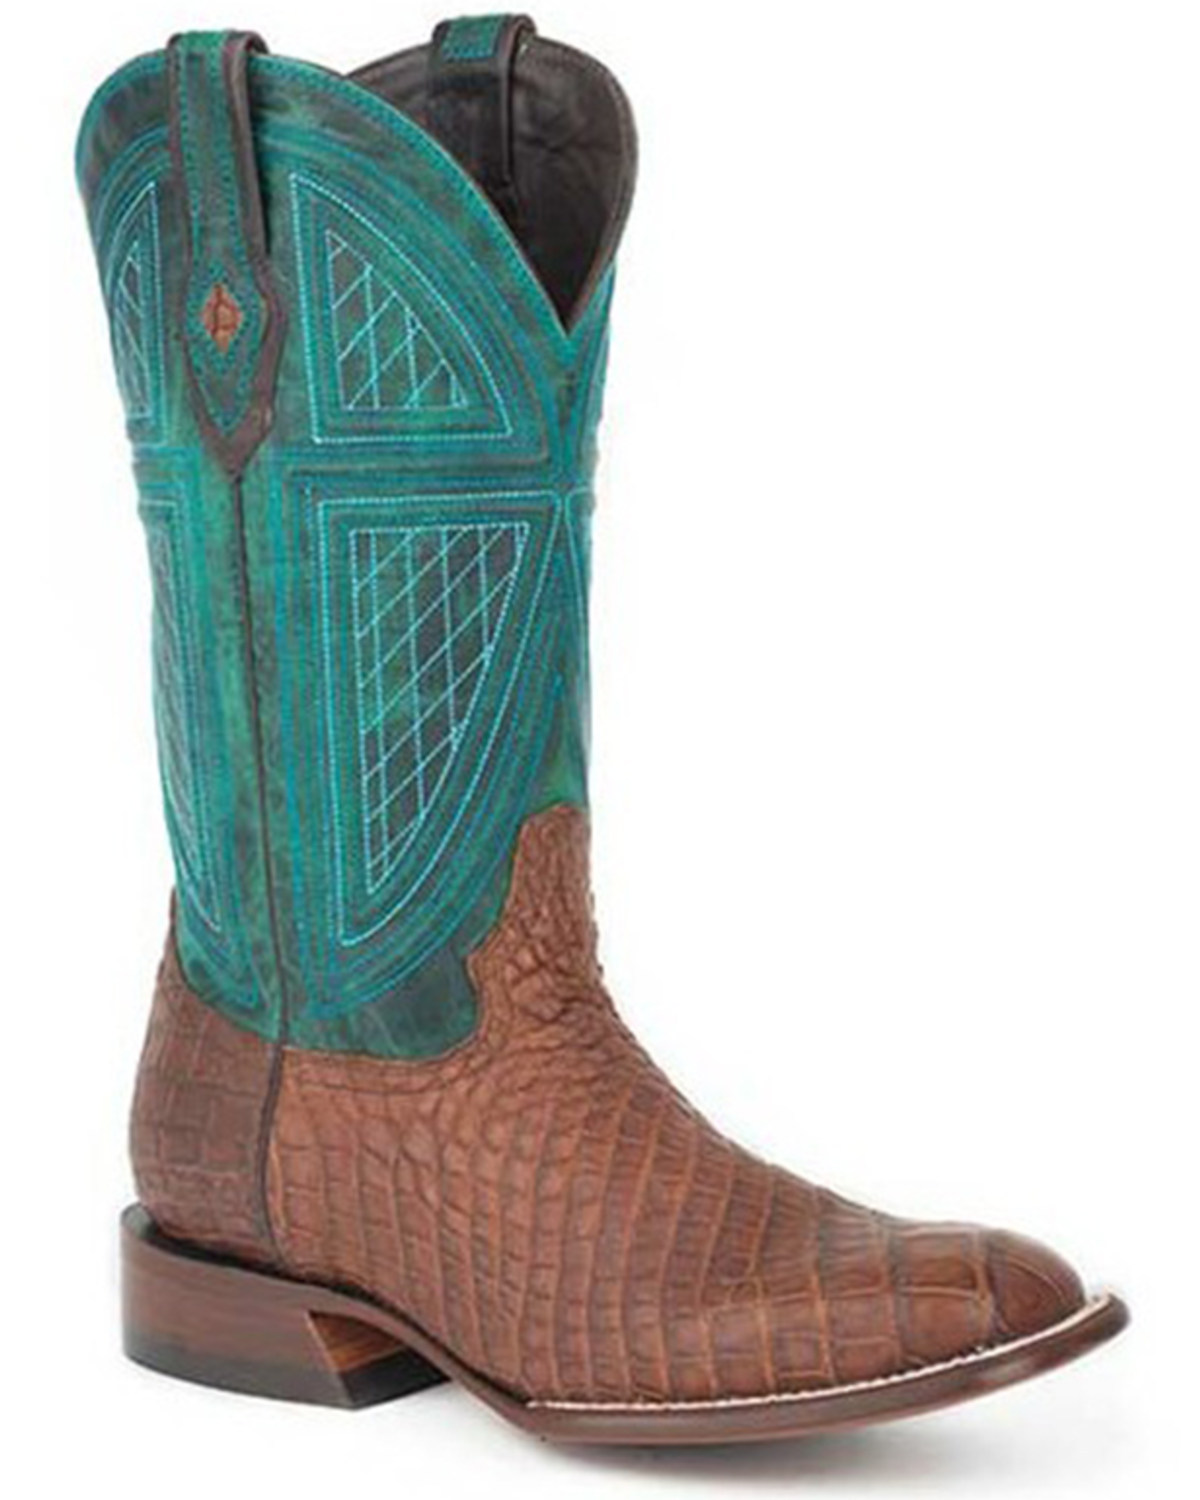 Stetson Men's Big Horn Oiled Alligator Exotic Western Boots - Square Toe